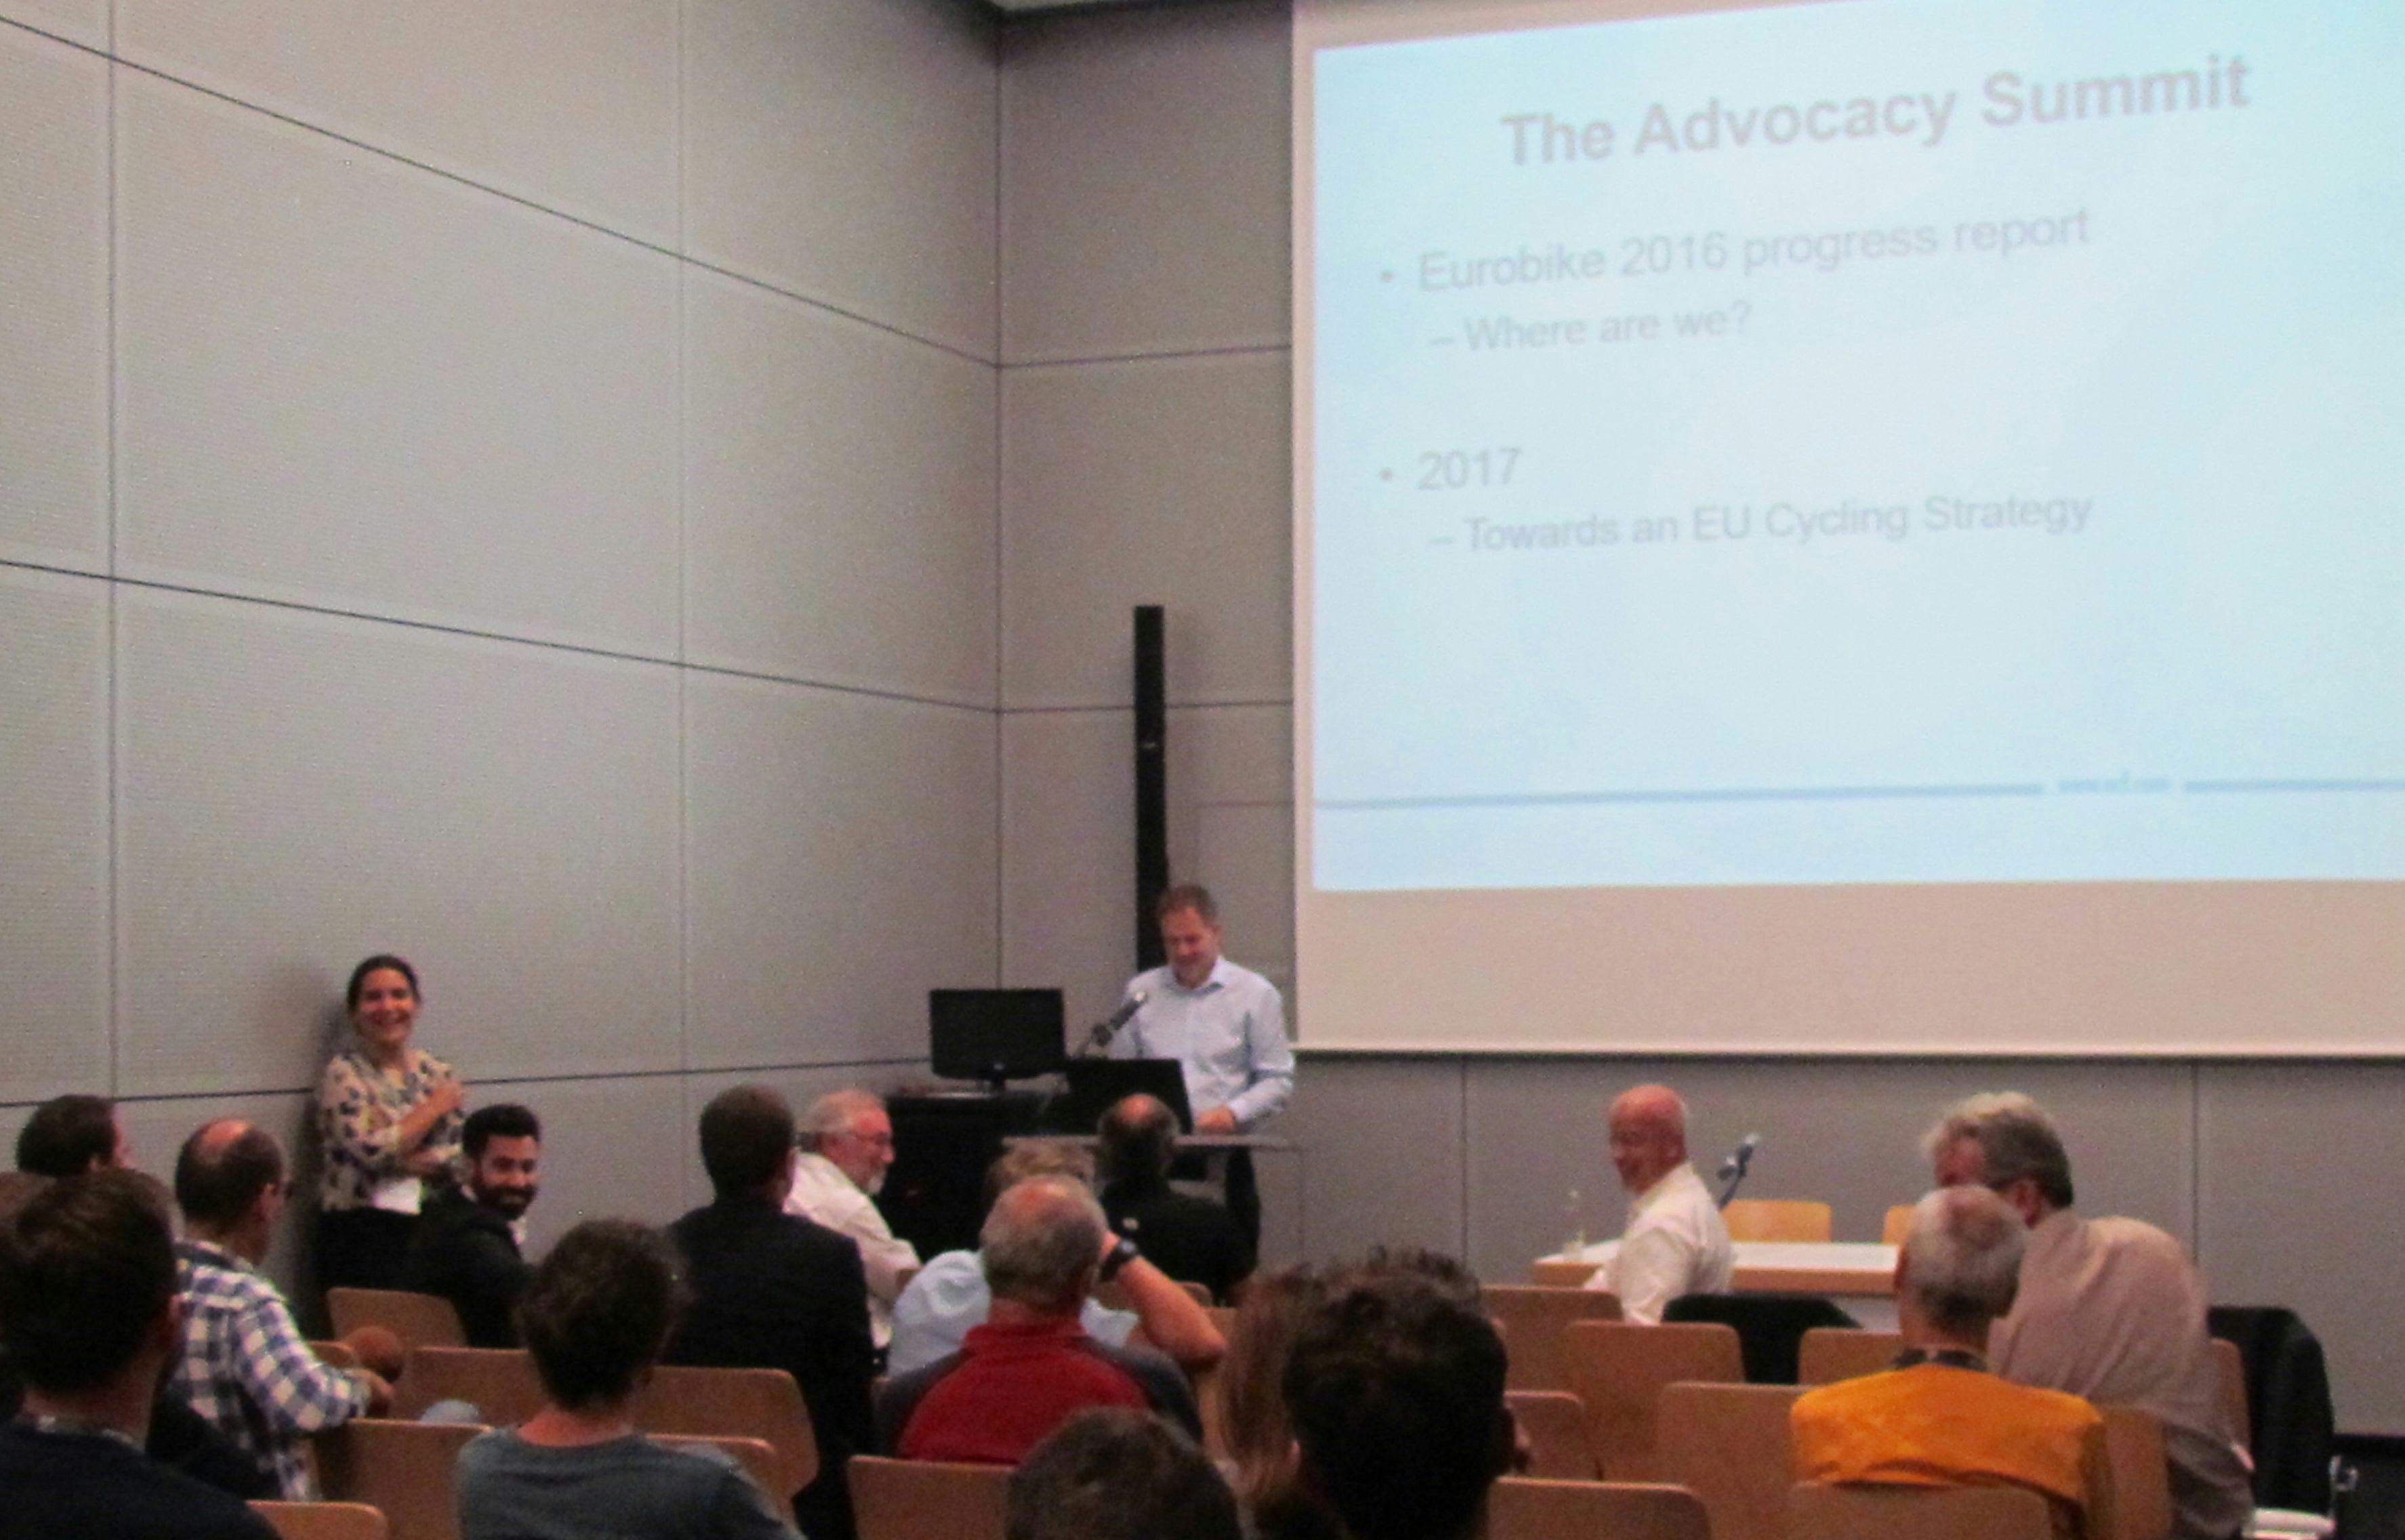 Cycling Industry Club’s annual Advocacy Summit is organized at Eurobike. Club’s VIP event takes place at Taipei Cycle on March 23. – Photo Bike Europe